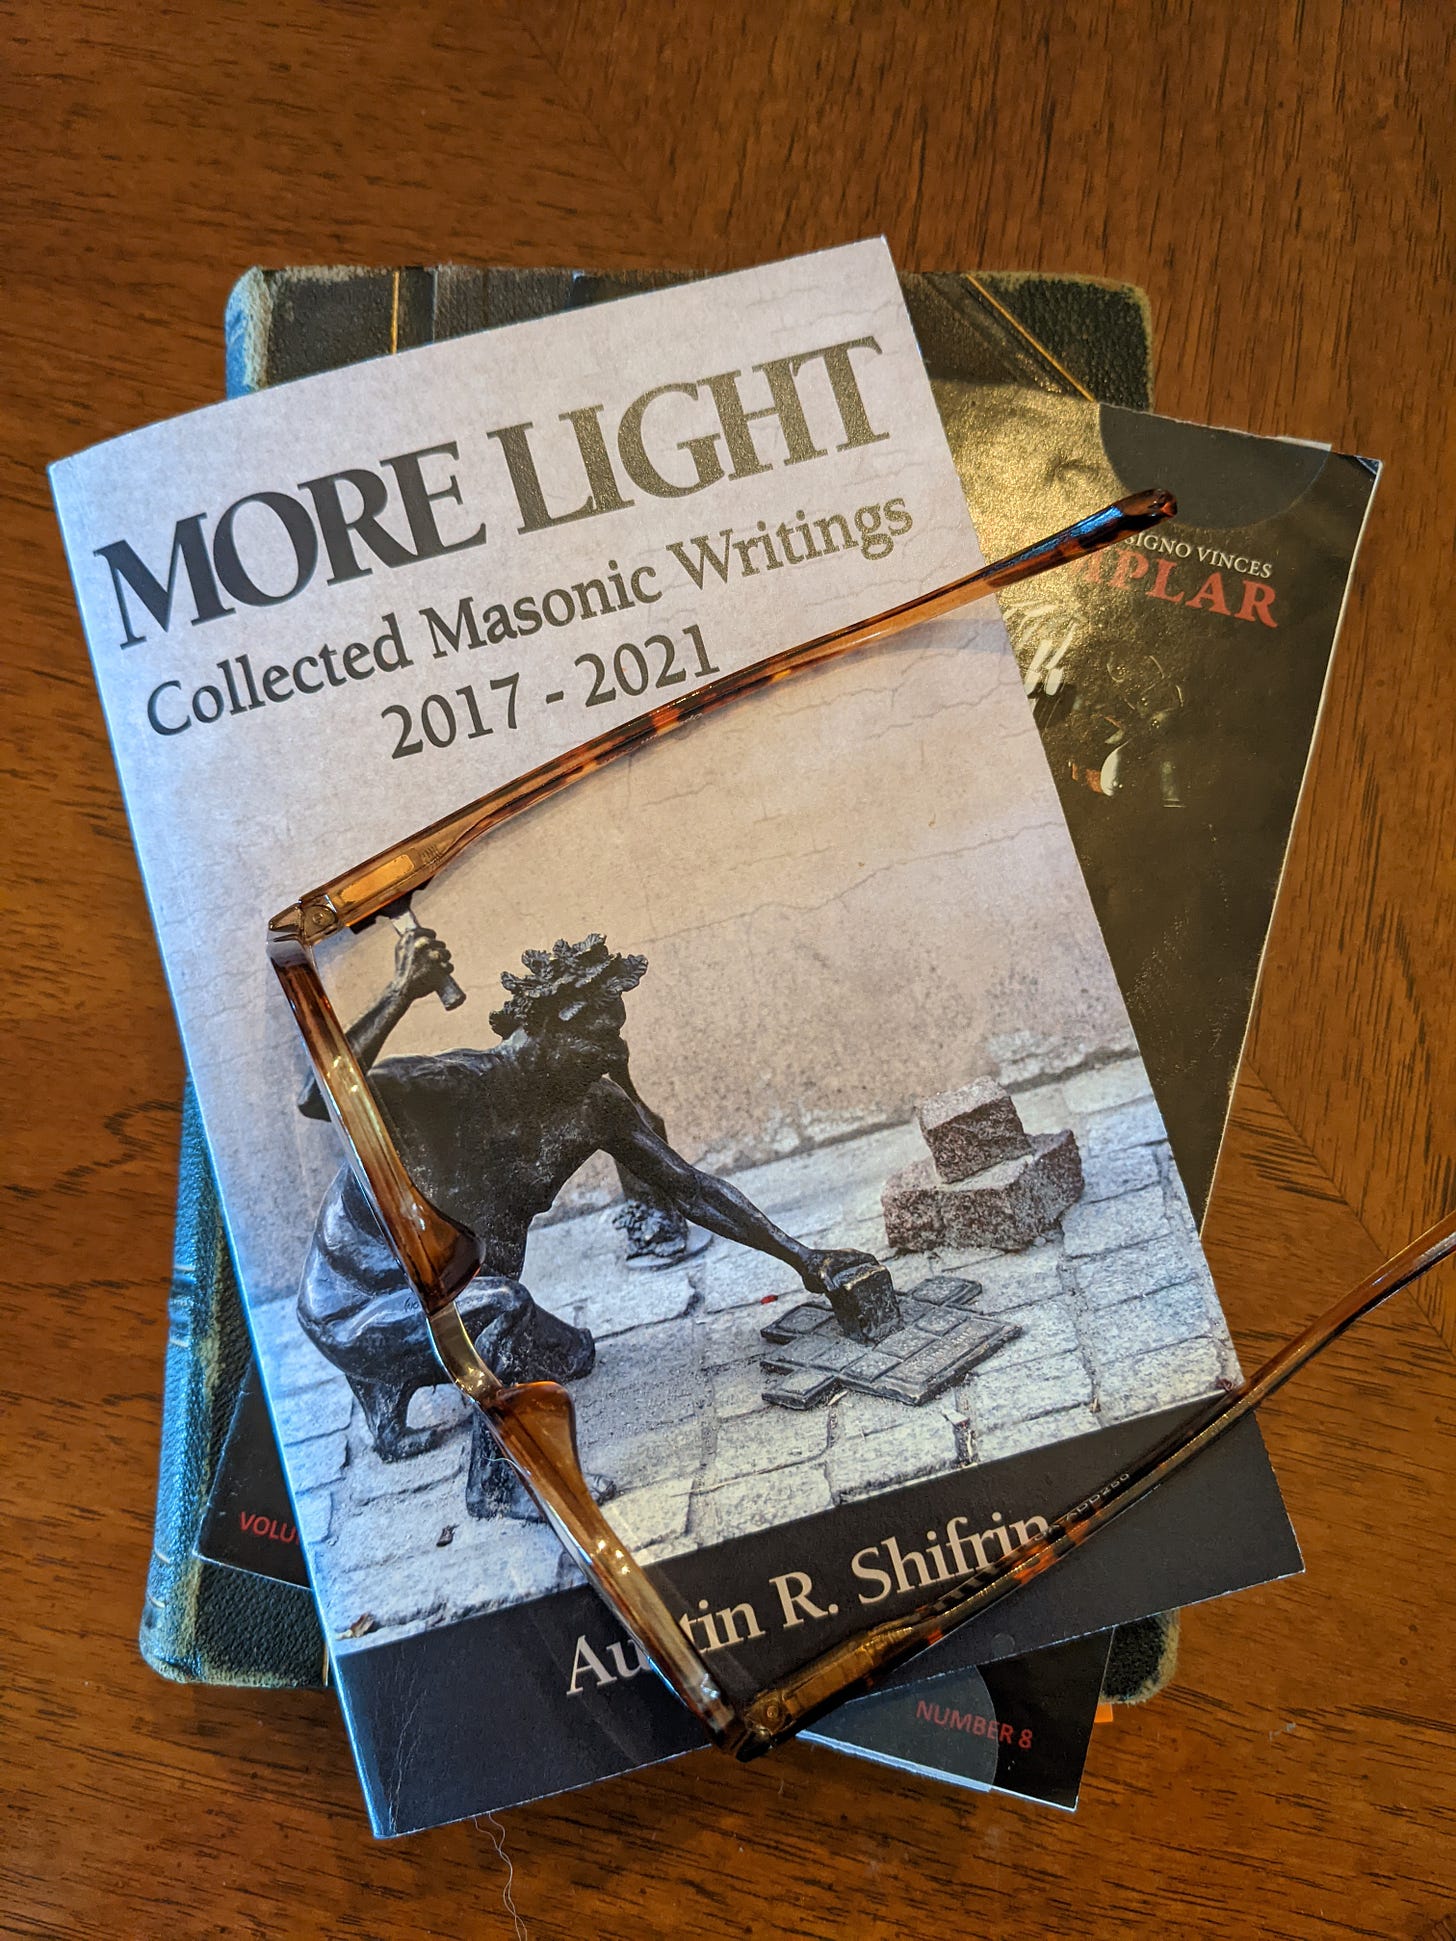 Book: More Light, Collected Masonic Writings